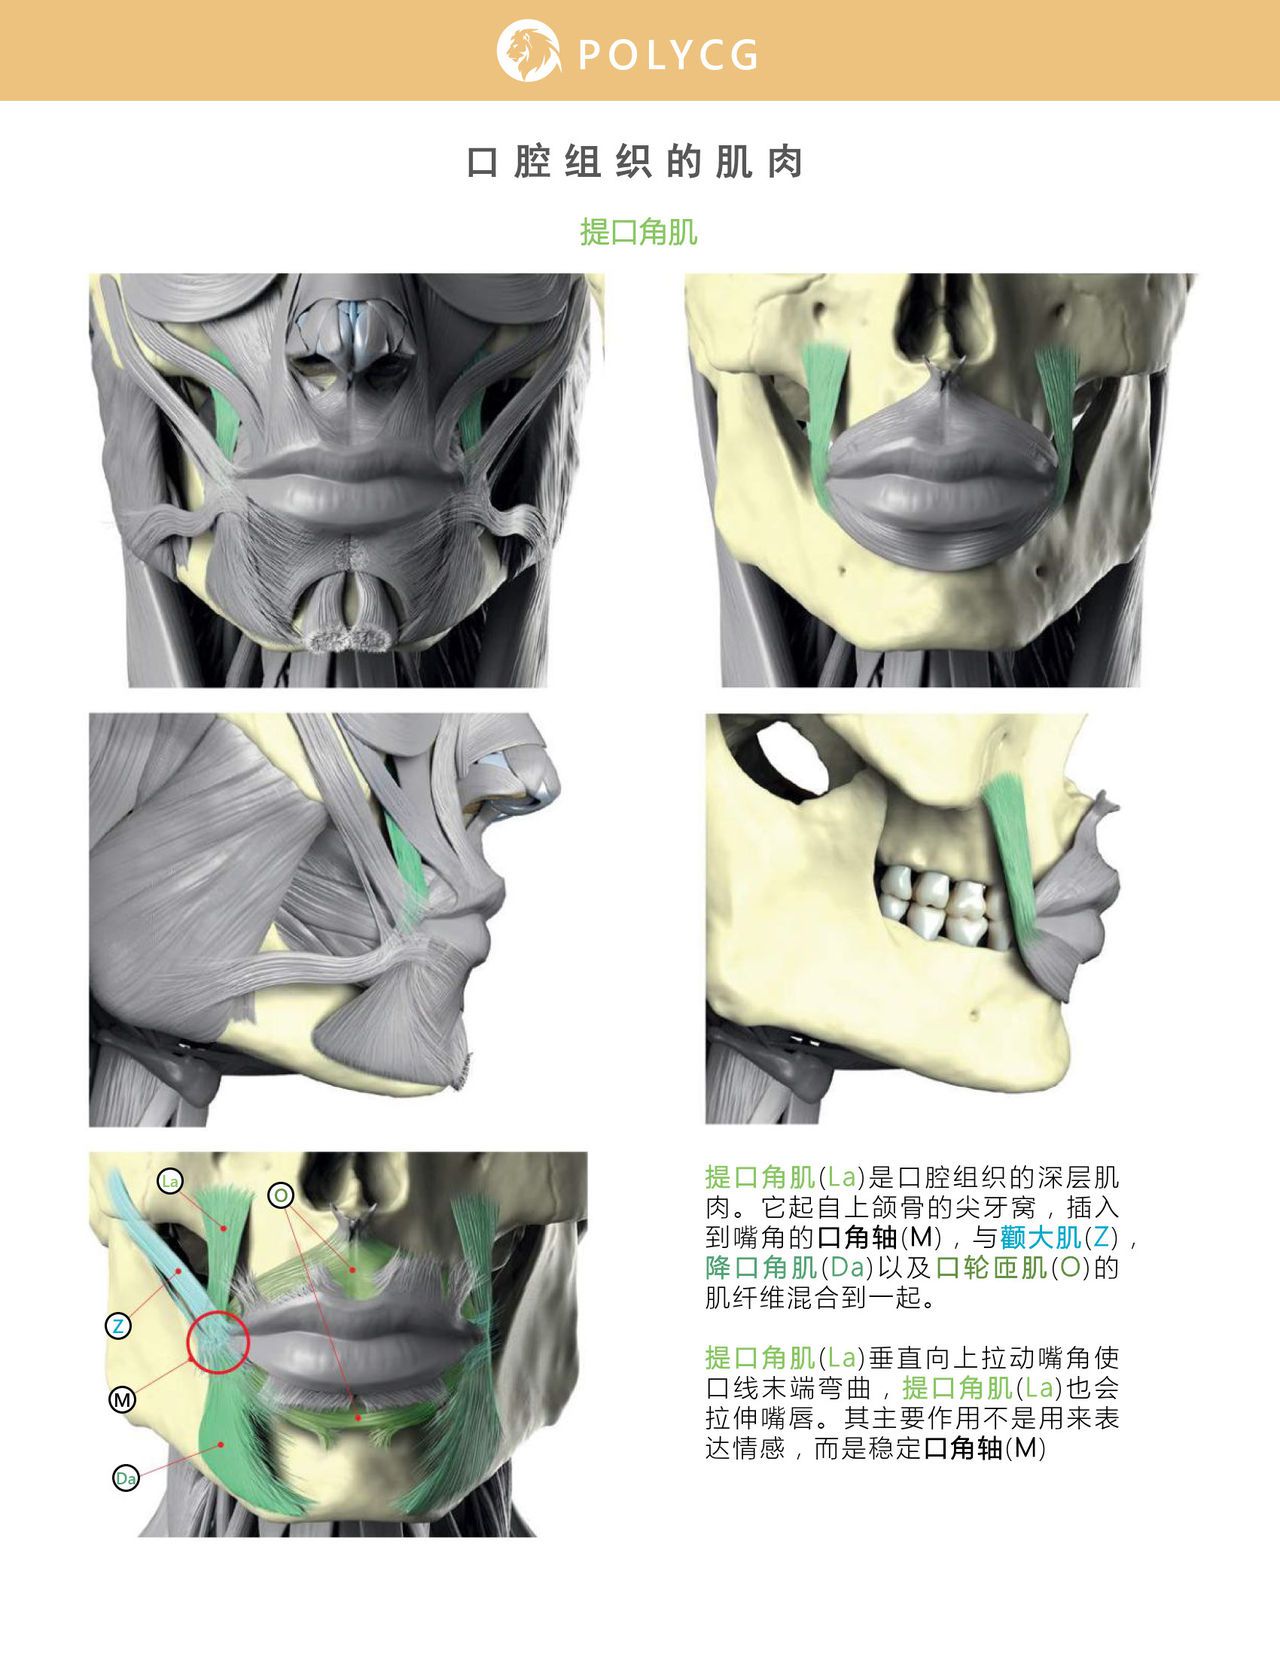 Uldis Zarins-Anatomy of Facial Expression-Exonicus [Chinese] 面部表情艺用解剖 [中文版] 110